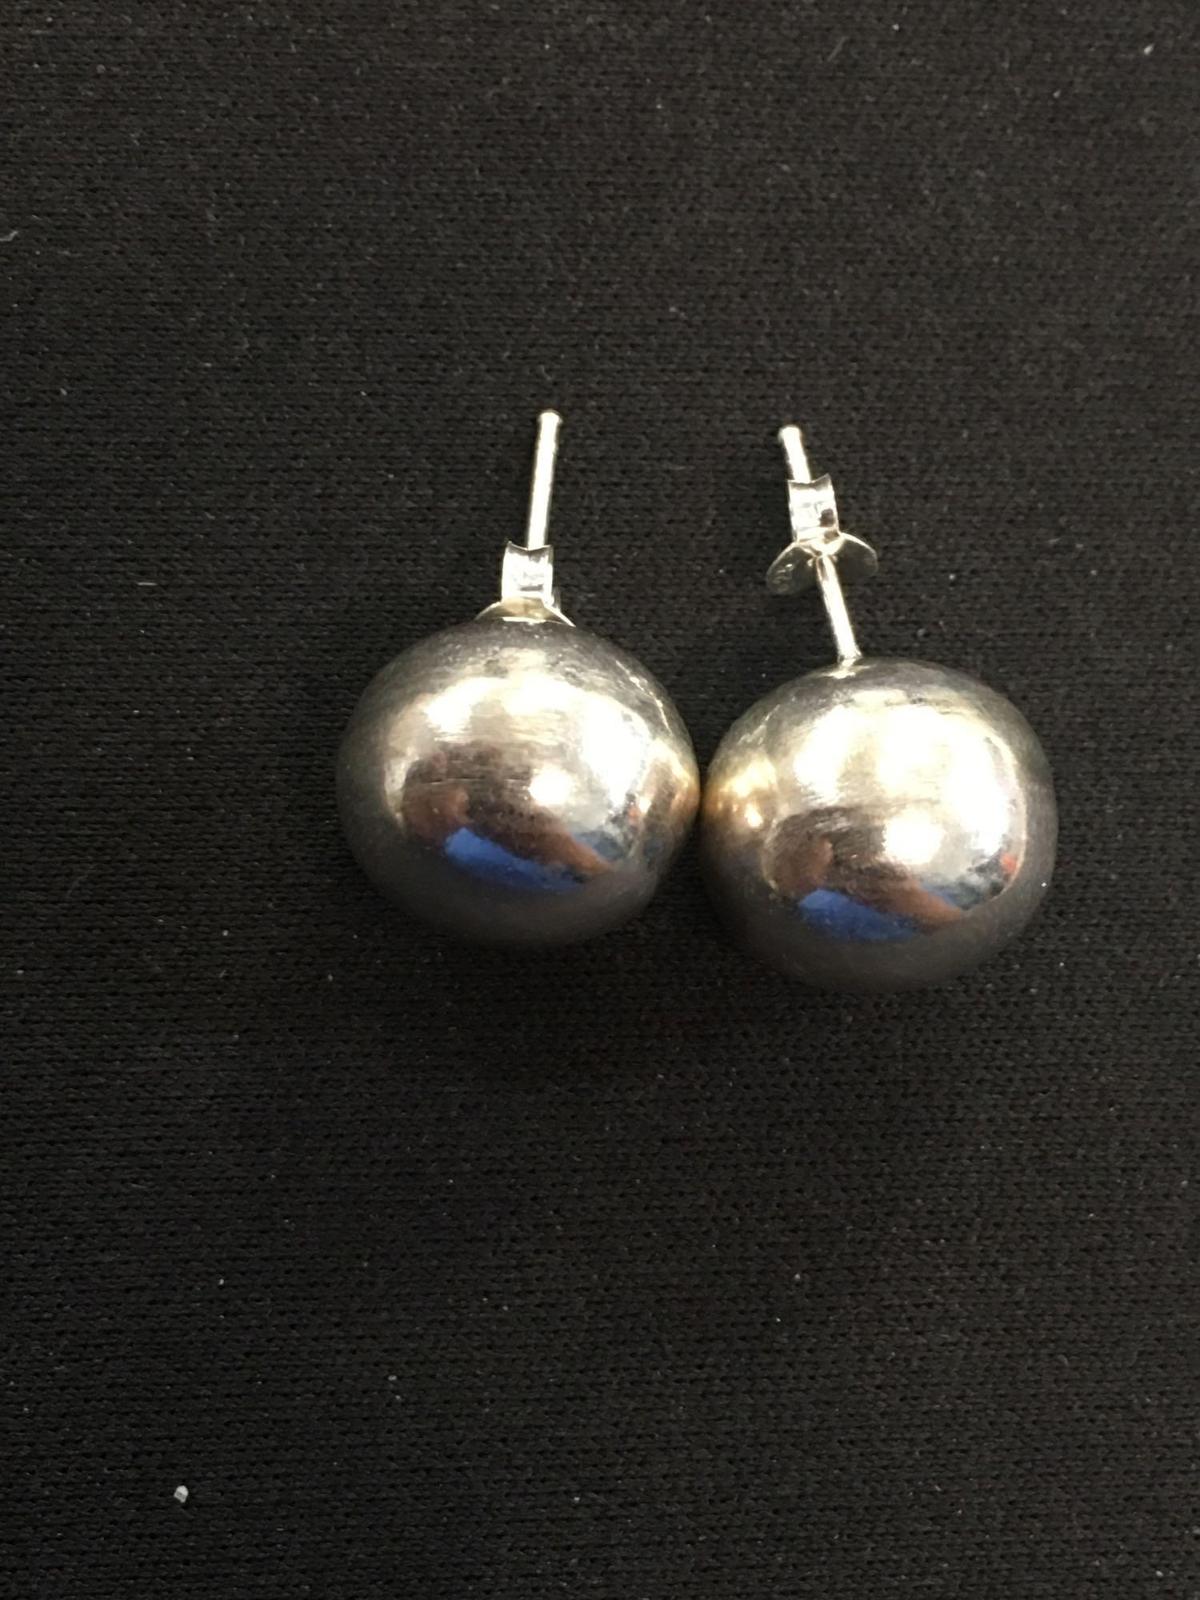 Large Ball Shaped Sterling Silver Pair of Stud Earrings